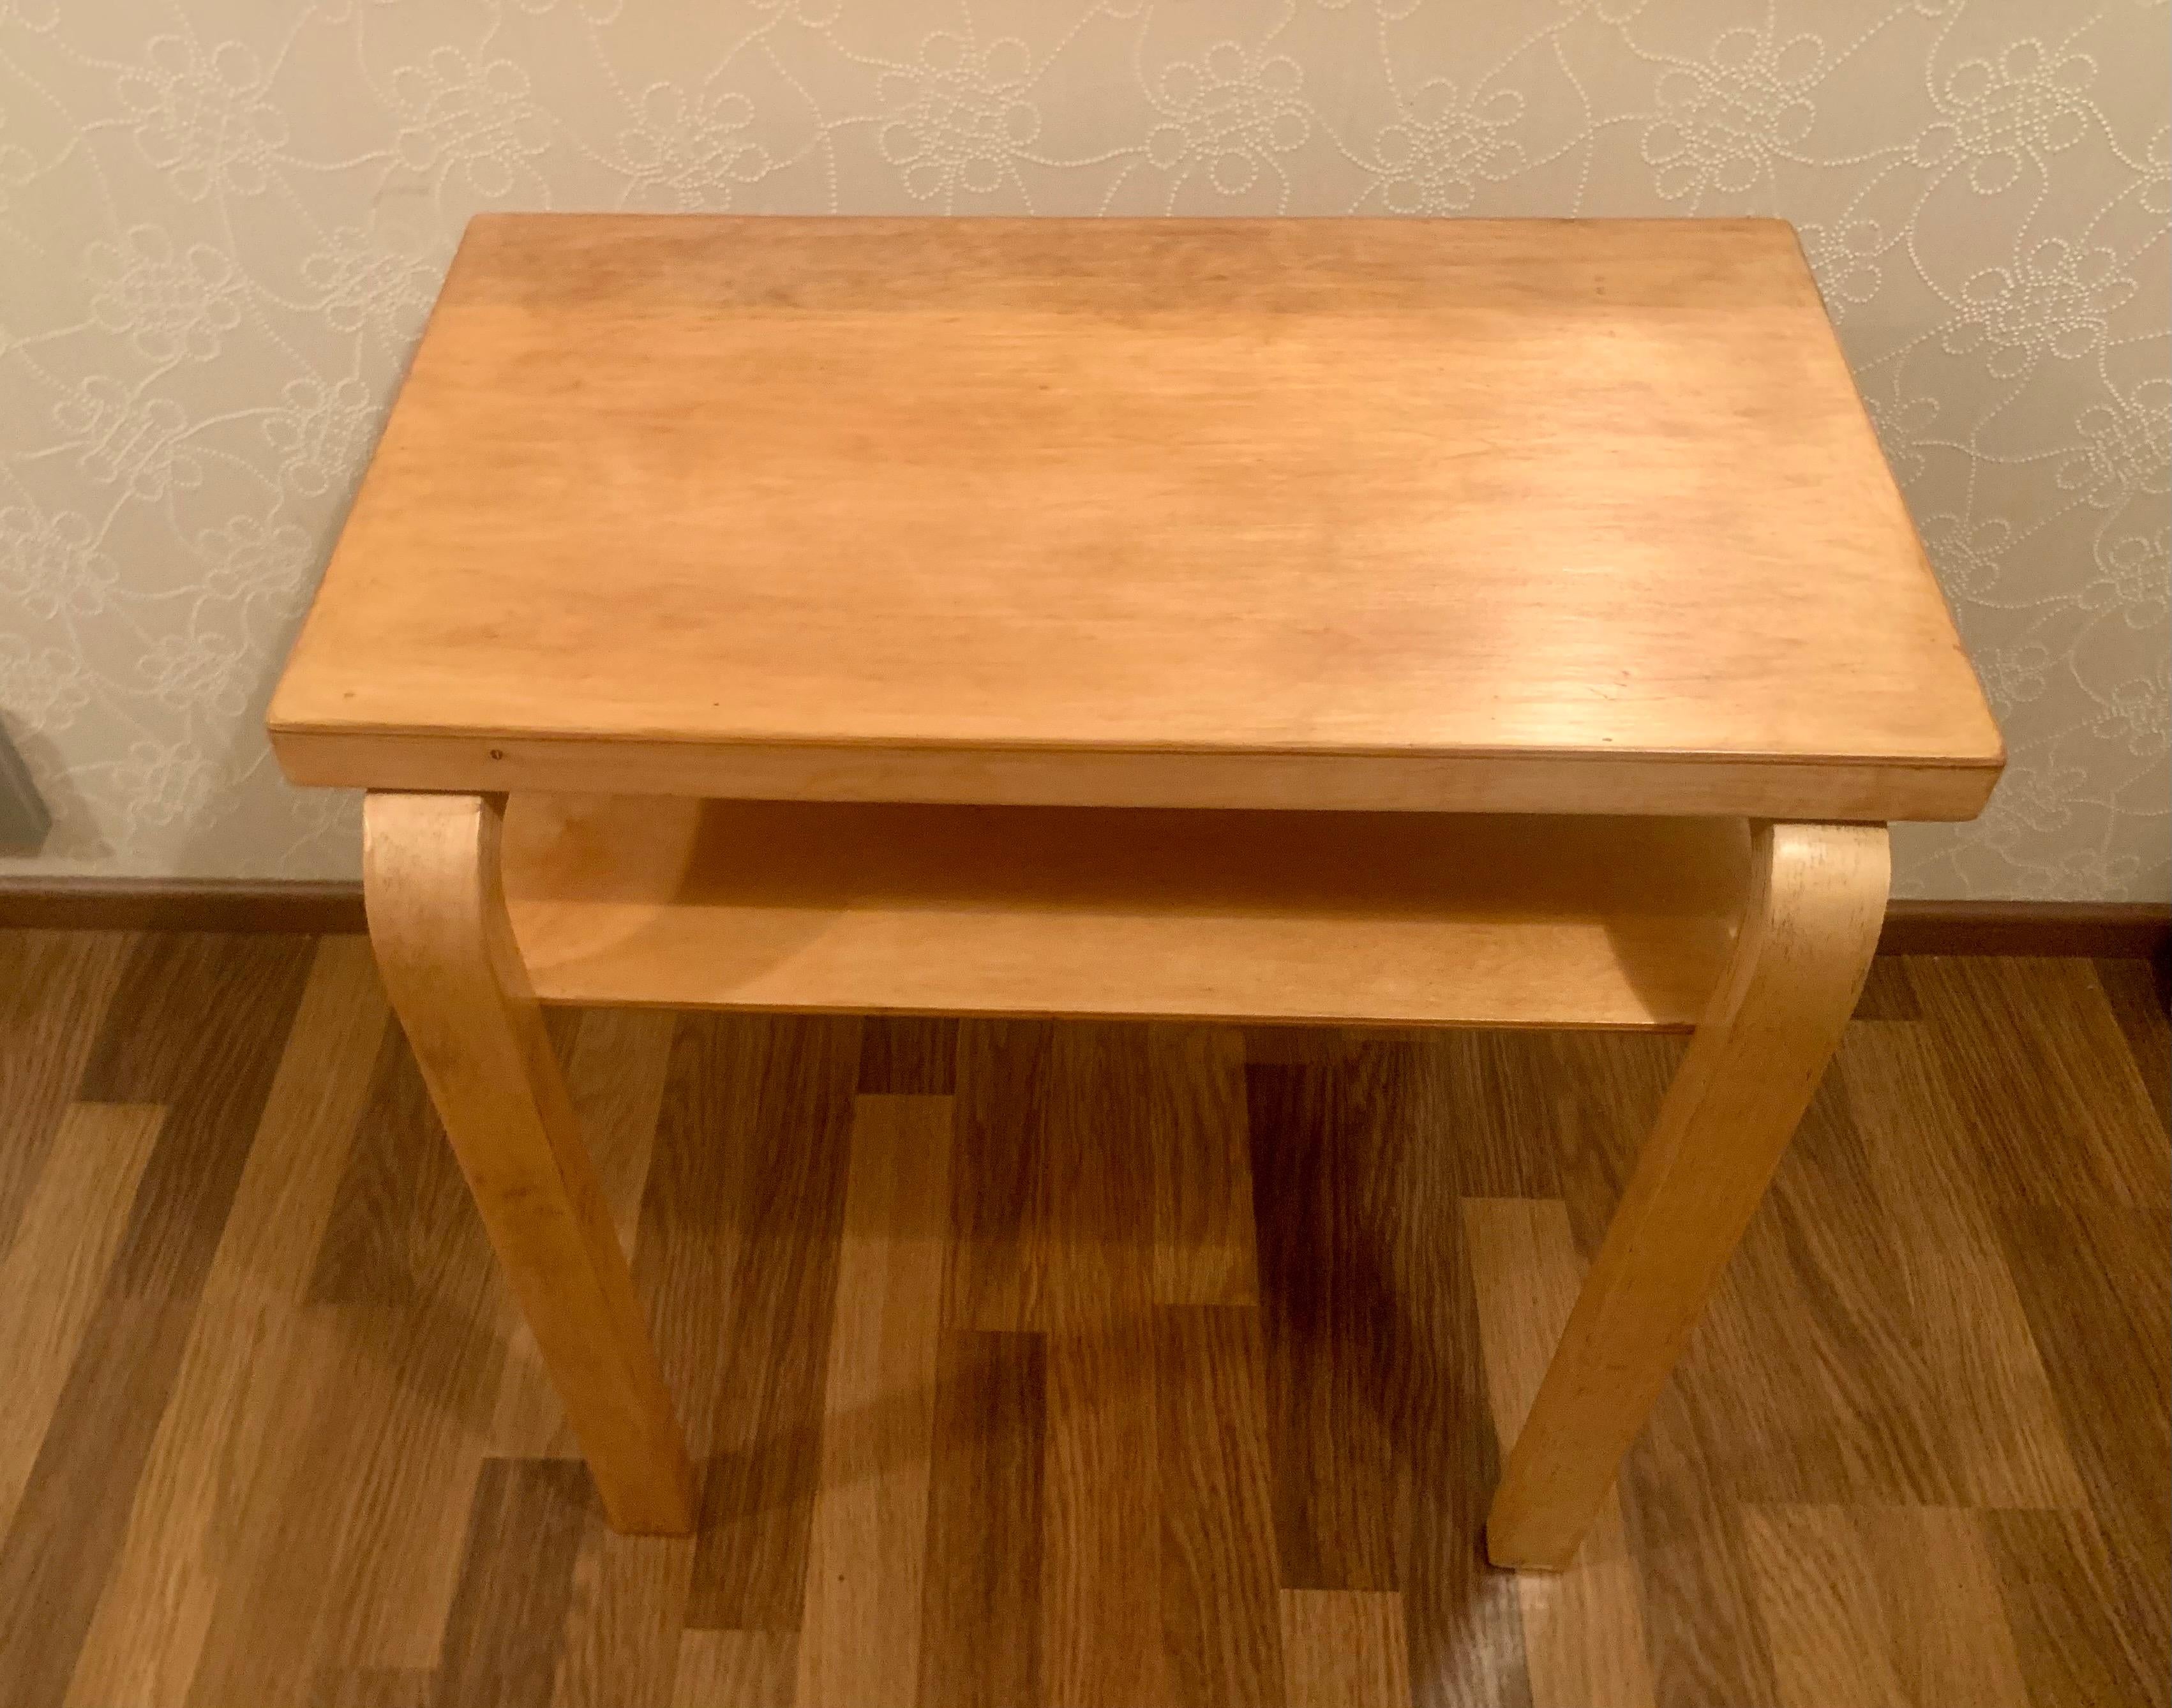 A rare Alvar Aalto (1898-1976) radio table, the table is in good condition, manufactured in the 1930s, for those who appreciate old Aalto for home or public spaces, or for collectors.